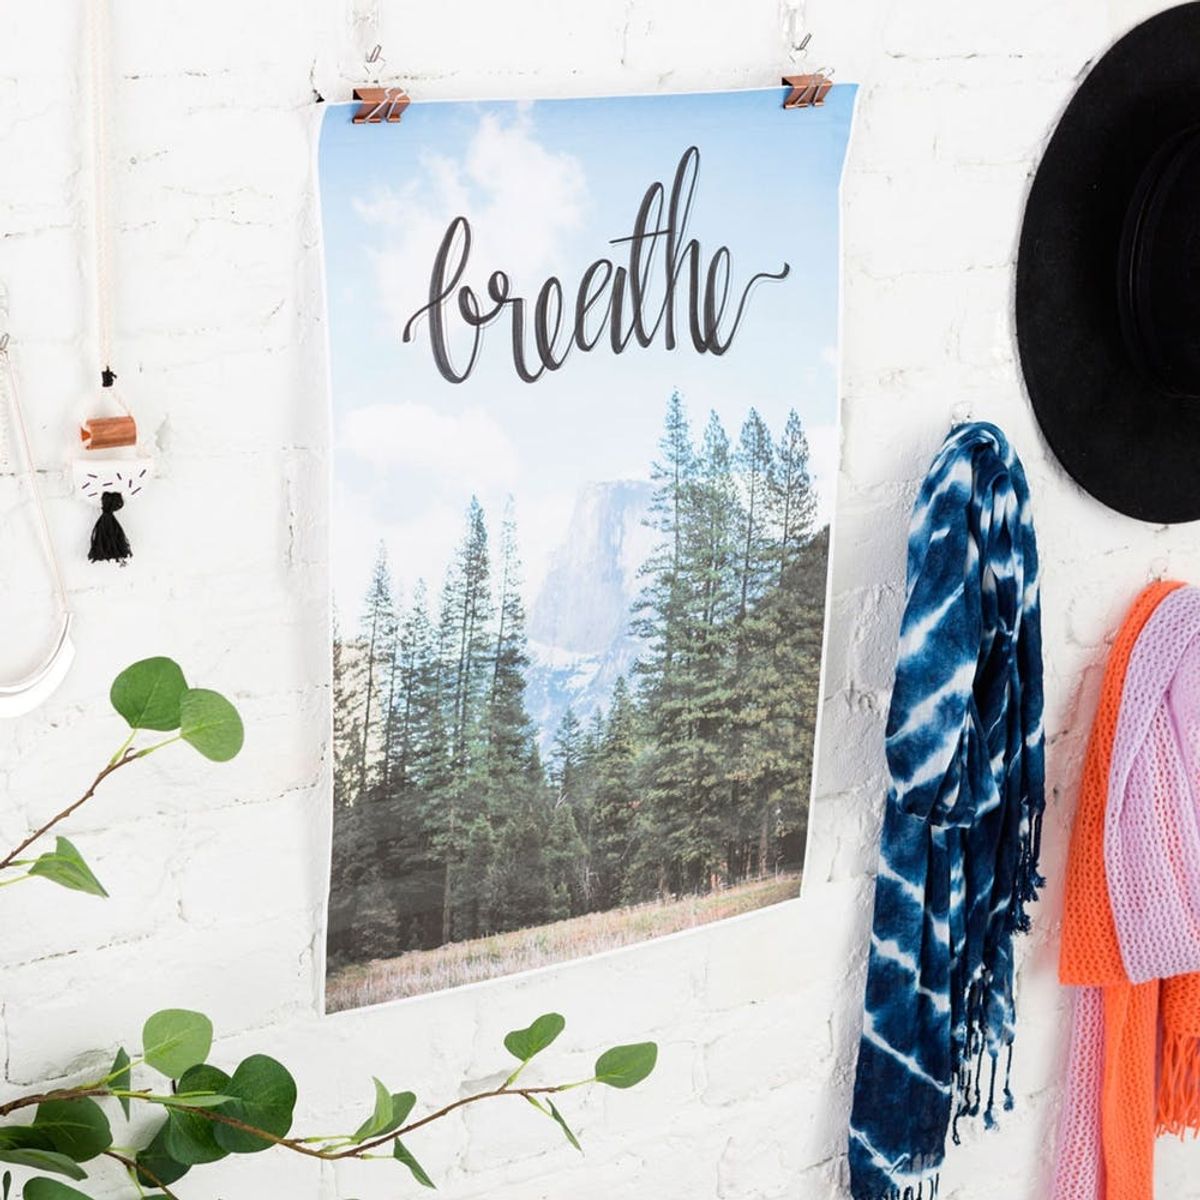 Make This Lettered Photo Wall Art in 30 Minutes or Less